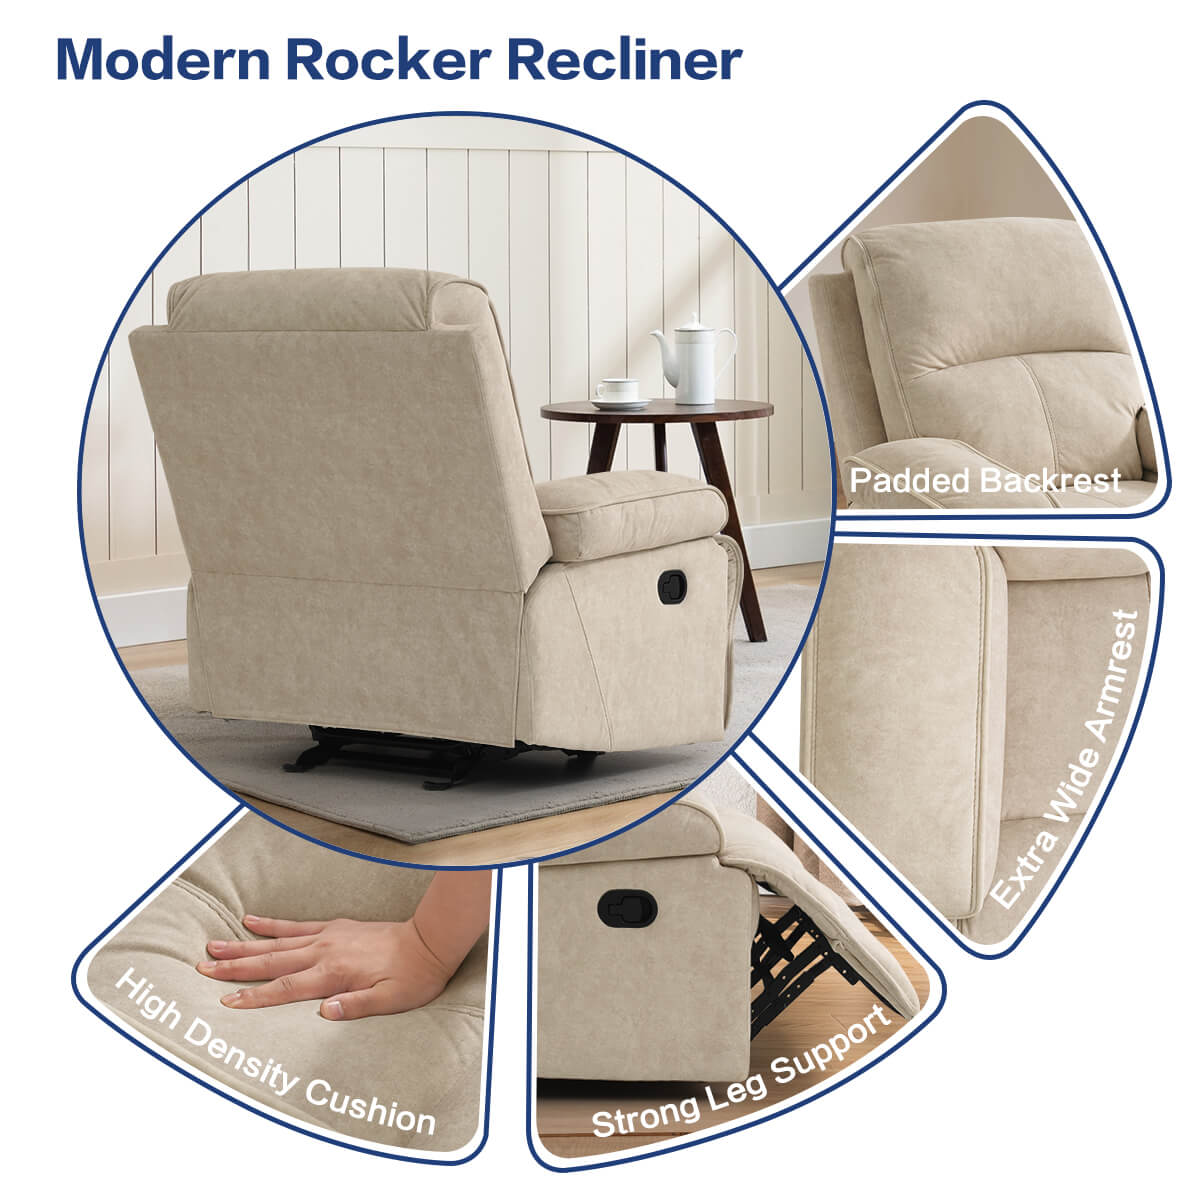 Manual Rocking Recliner Nursery Gliders, Breathable Fabric Flaxen